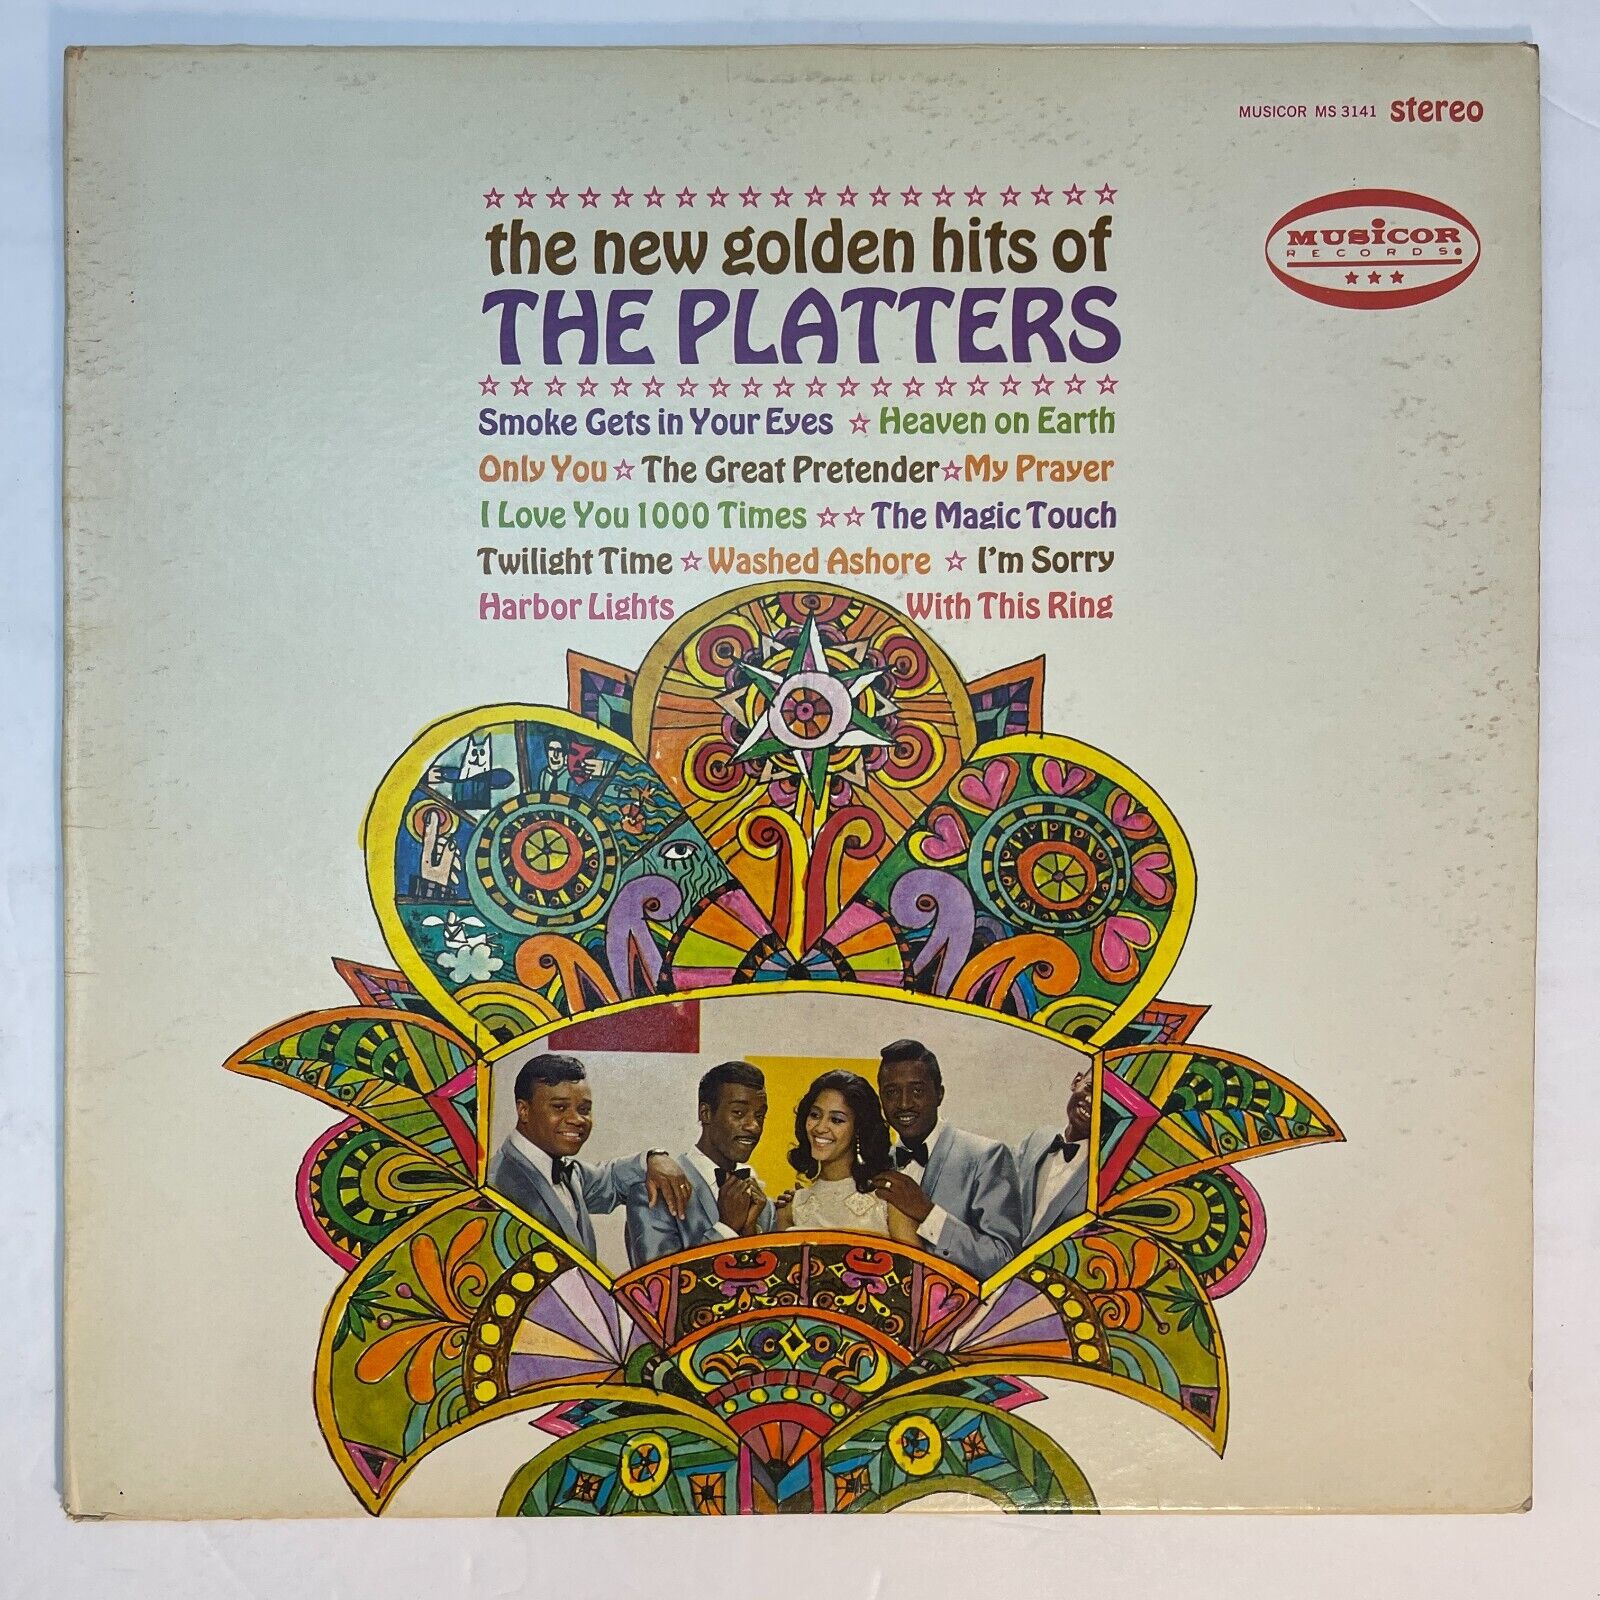 The Platters ‎– The New Golden Hits Of The Platters Vinyl, LP 1967 Musicor